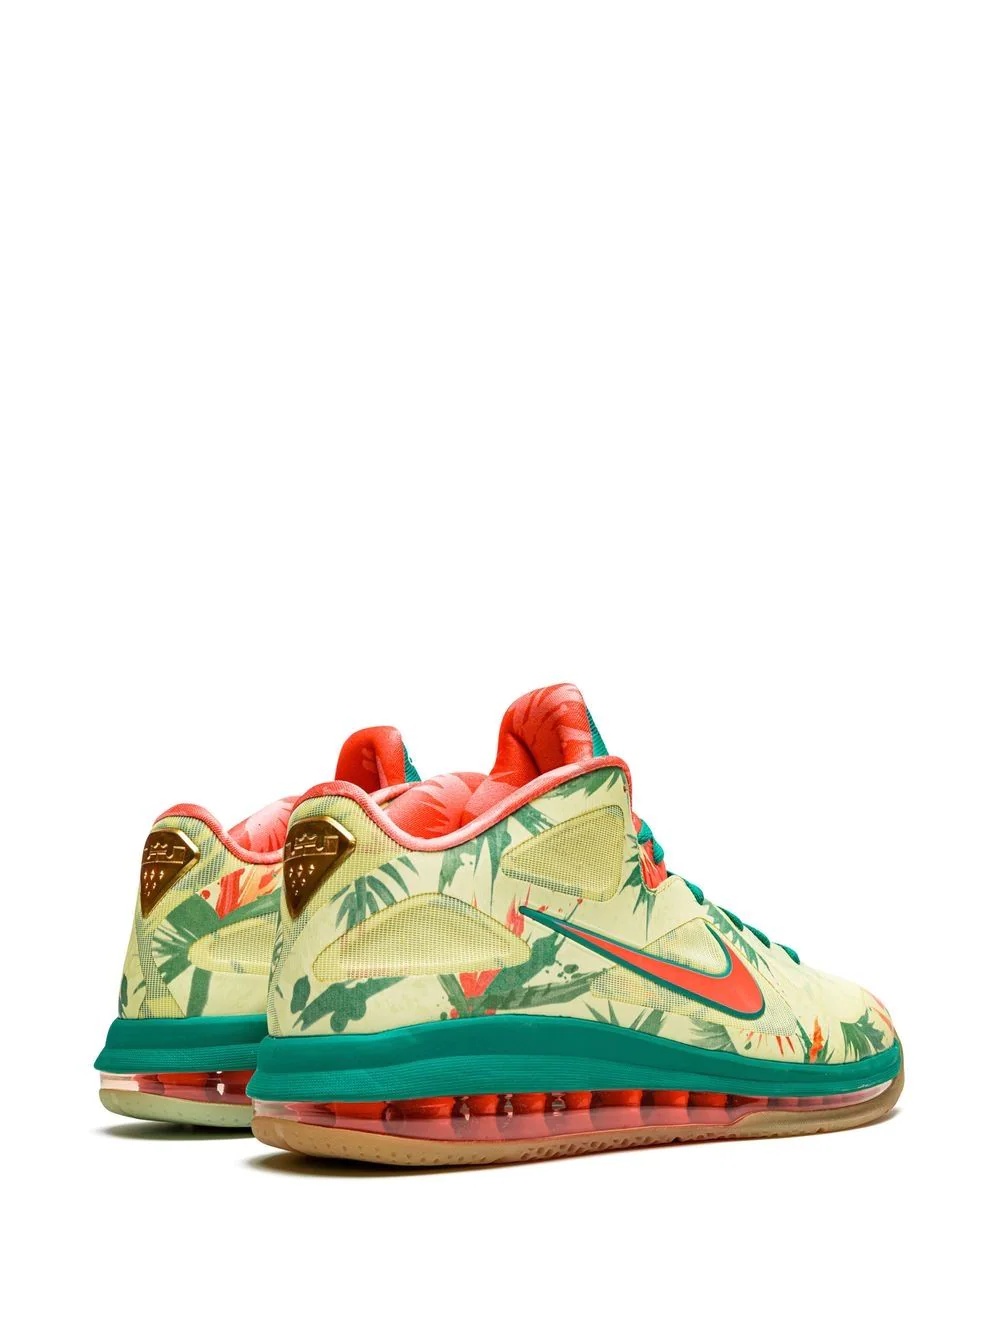 LeBron 9 Low "Arnold Palmer" sneakers - 3